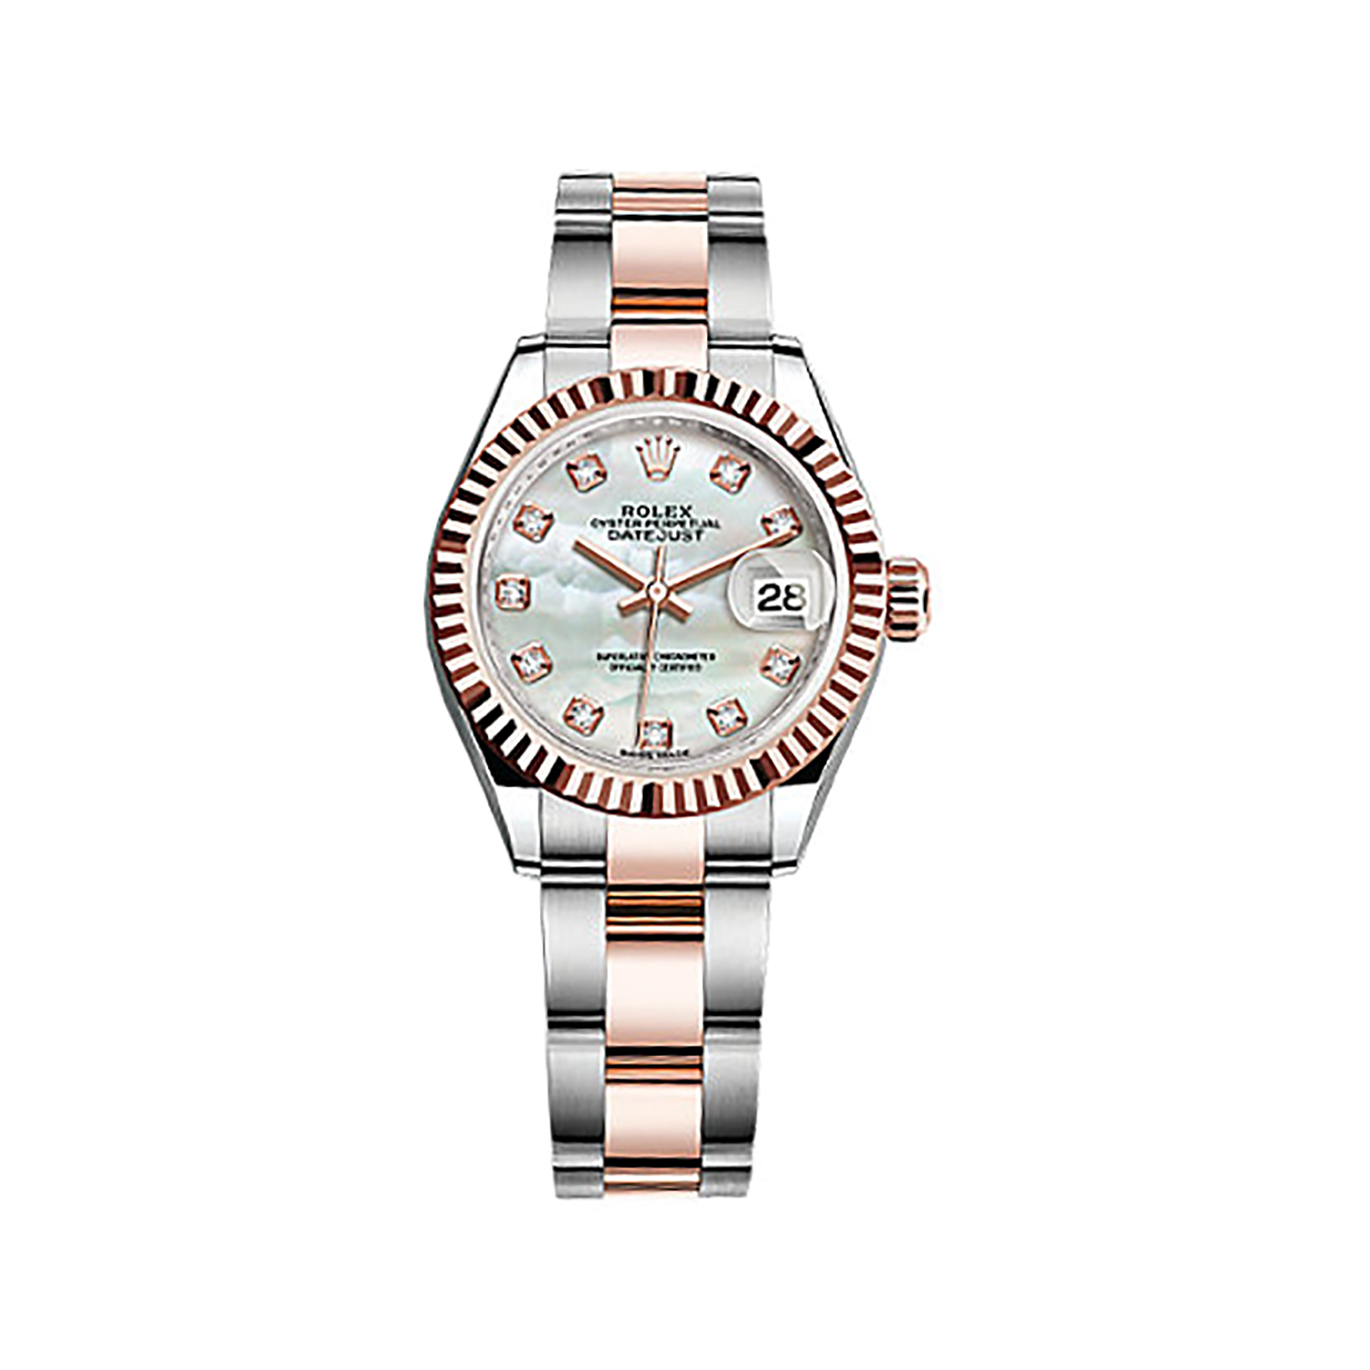 Lady-Datejust 28 279171 Rose Gold & Stainless Steel Watch (White Mother-of-pearl Set with Diamonds)